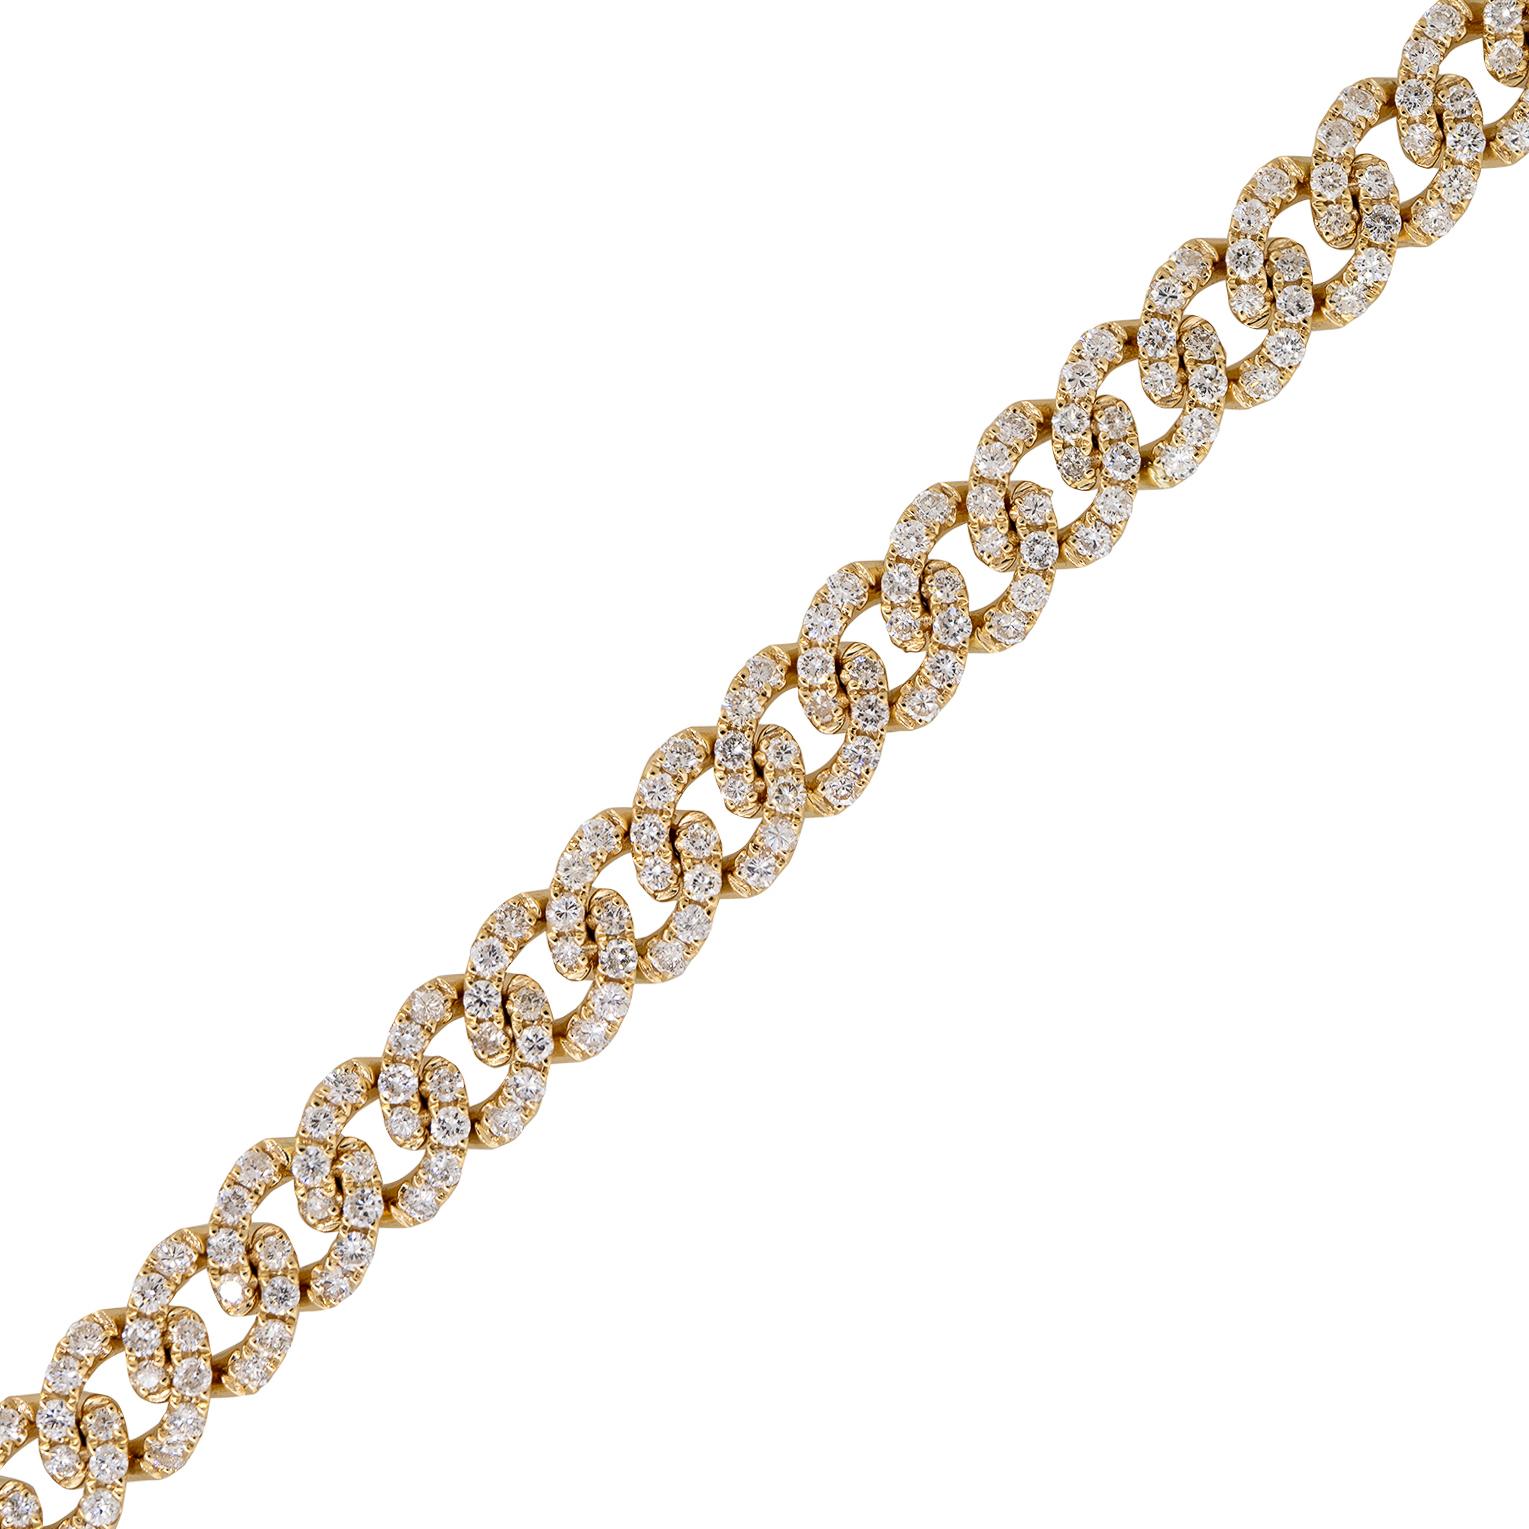 8.25 Carat Pave Diamond Cuban Link Necklace 18 Karat In Stock In Excellent Condition For Sale In Boca Raton, FL